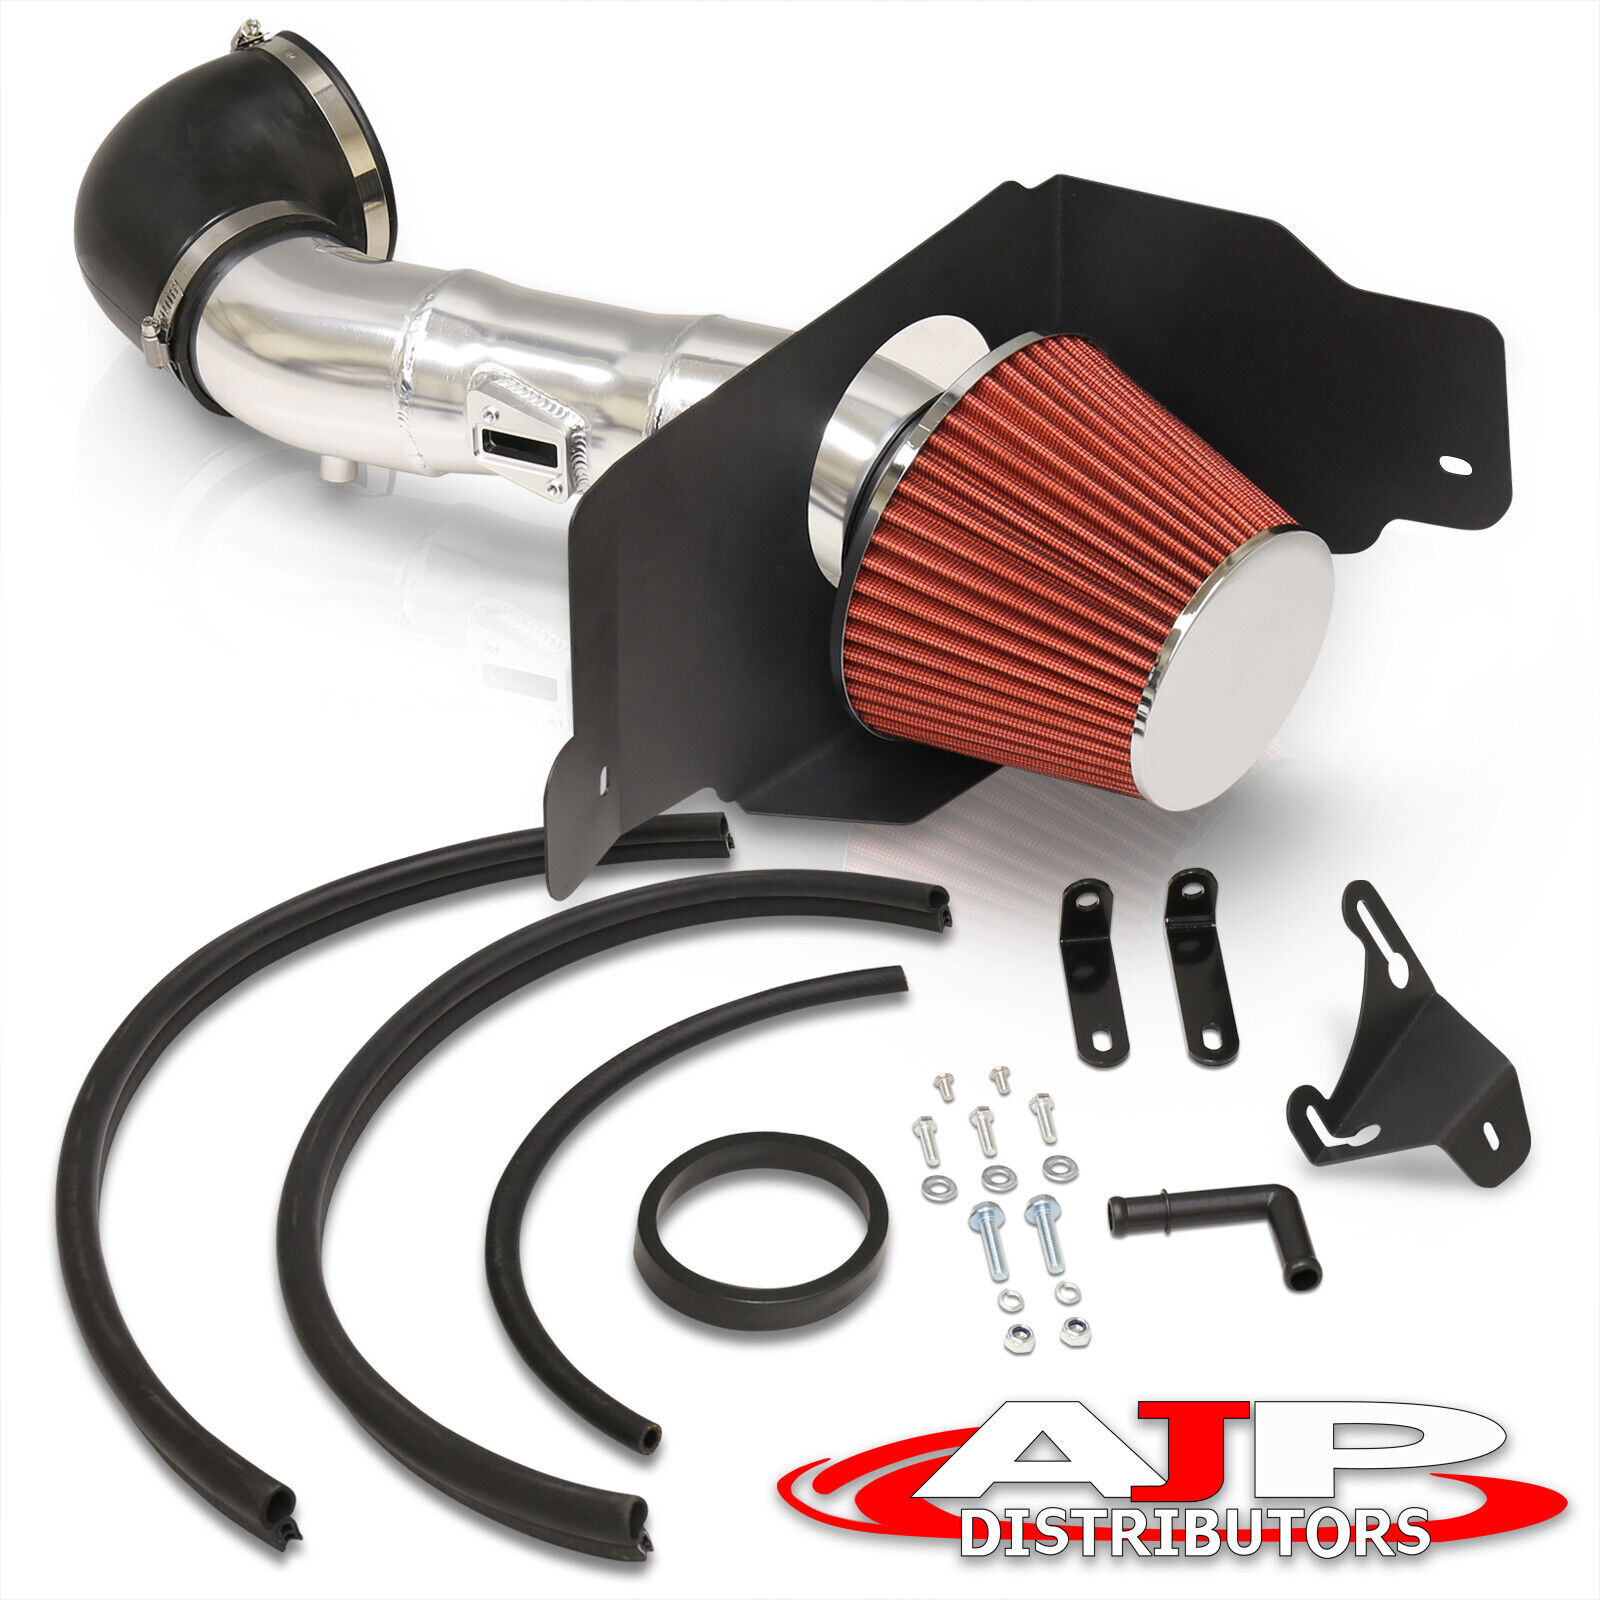 Polish Cold Air Intake Induction + Heat Shield For 2005-2009 Ford Mustang V8 4.6